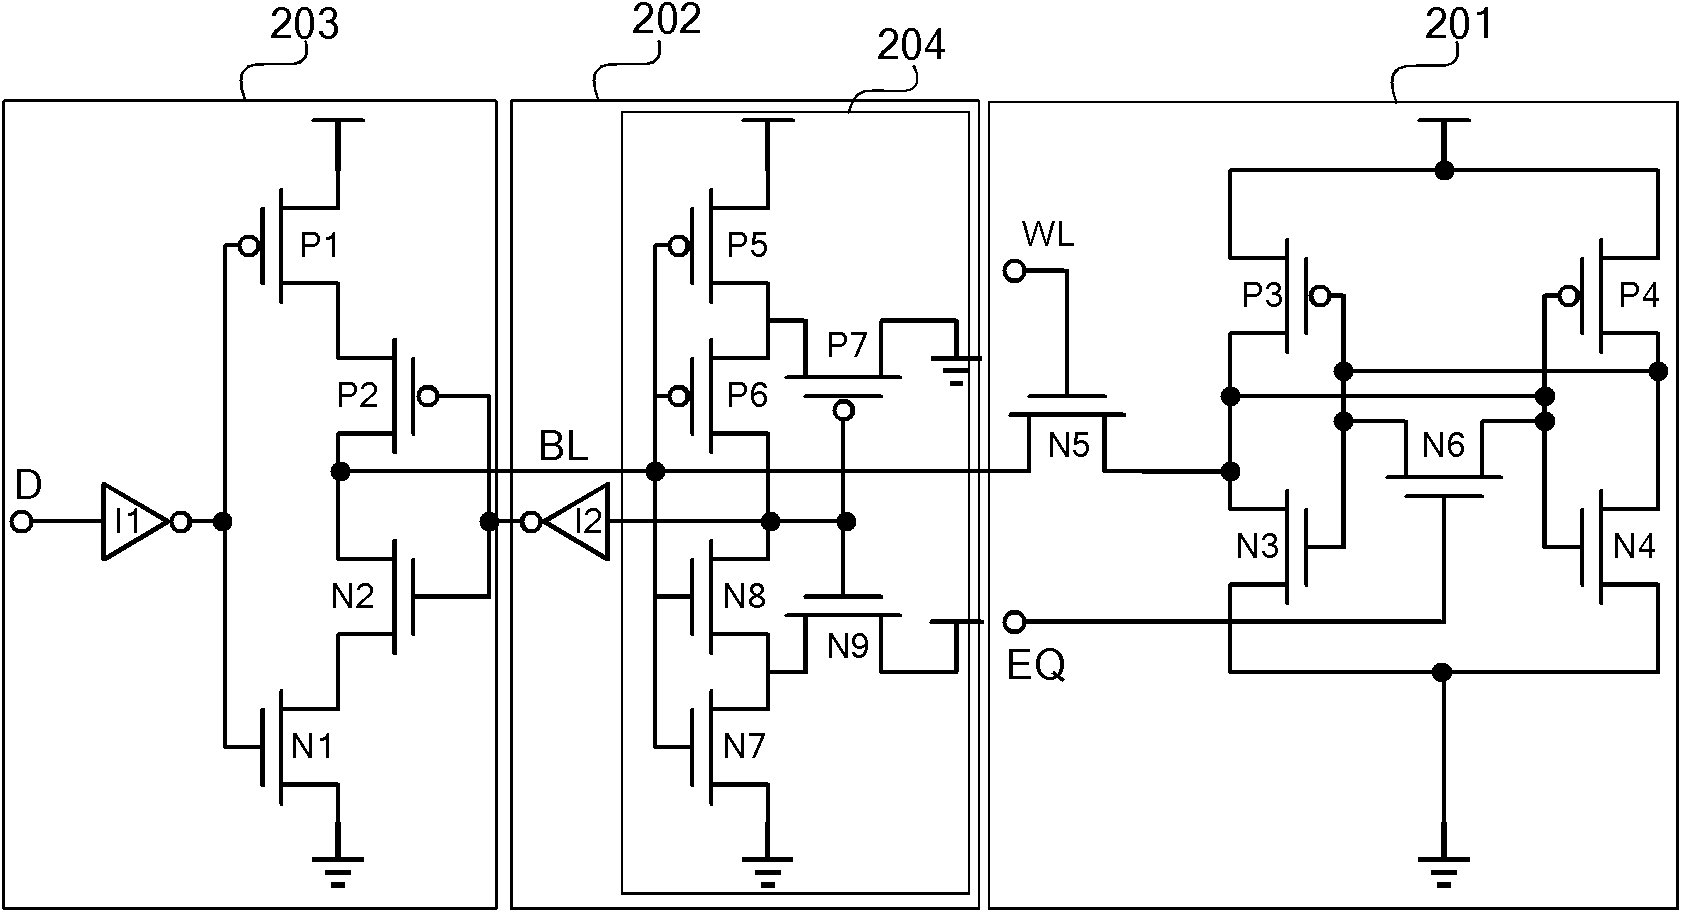 Storage unit and single-end low-swing bit line writing circuit